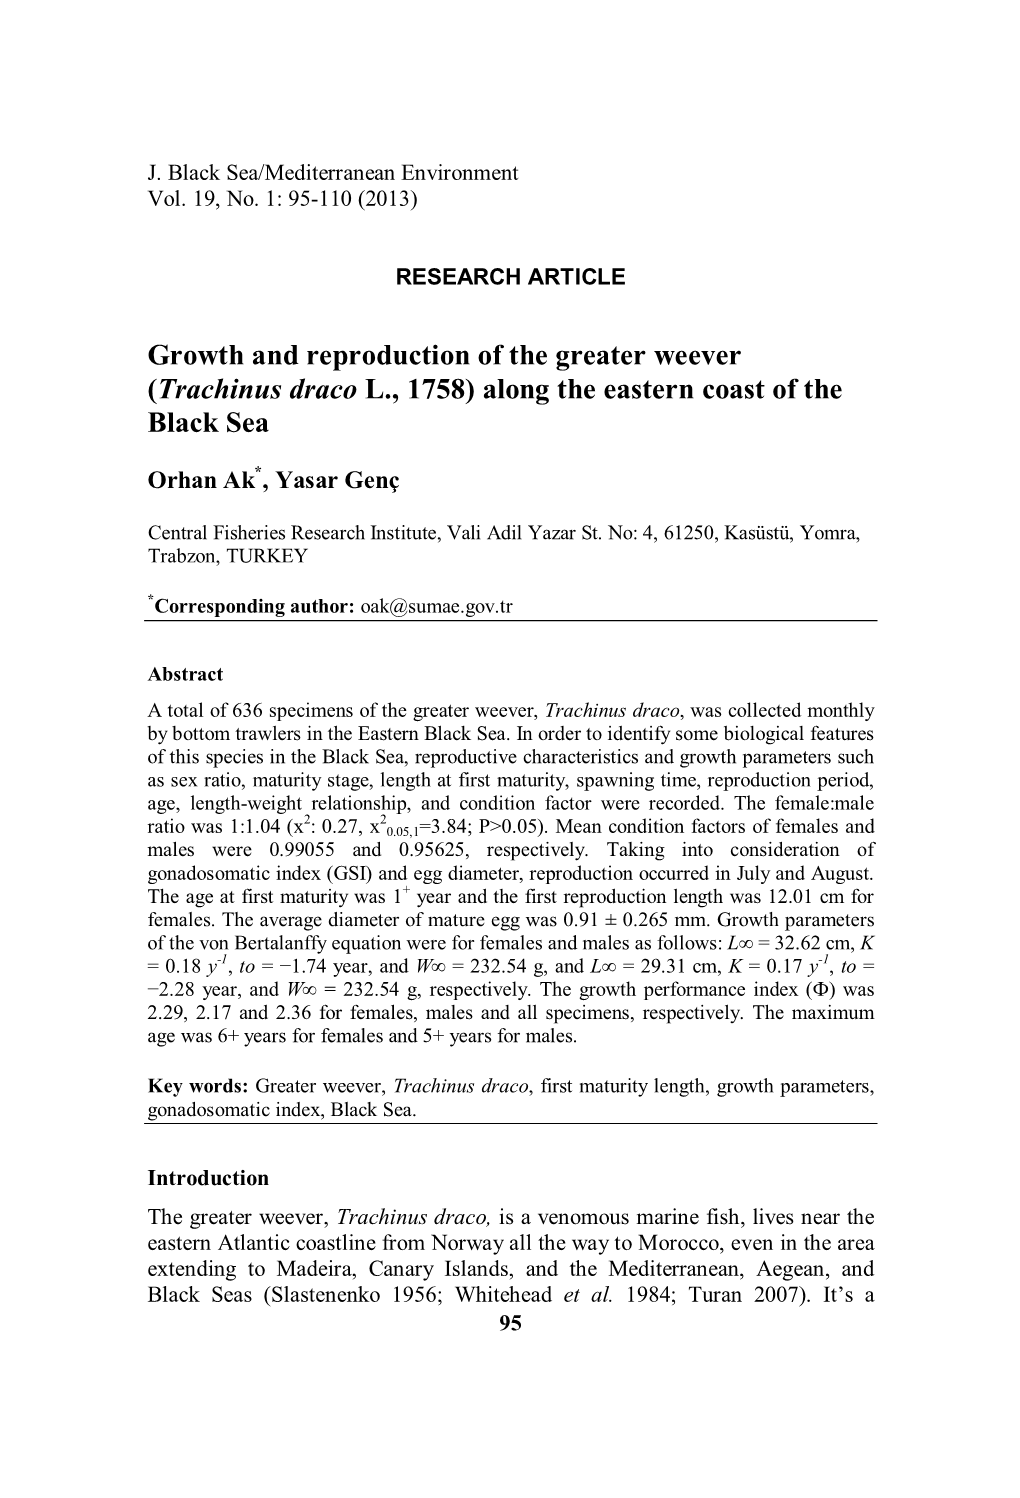 Growth and Reproduction of the Greater Weever (Trachinus Draco L., 1758) Along the Eastern Coast of the Black Sea